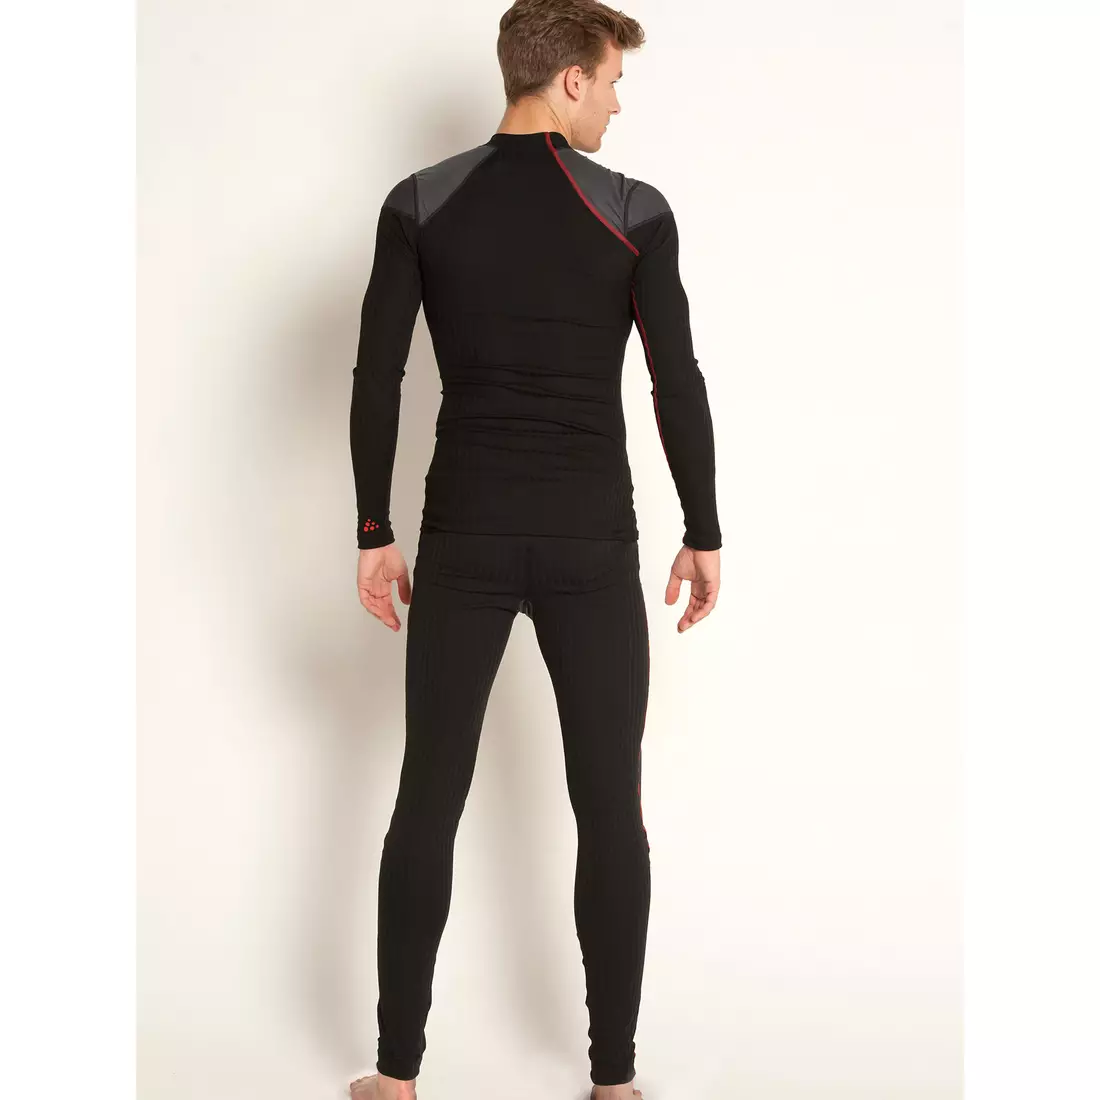 CRAFT BE ACTIVE EXTREME WINDSTOPPER - thermal underwear - 193893-9920 - men's long johns